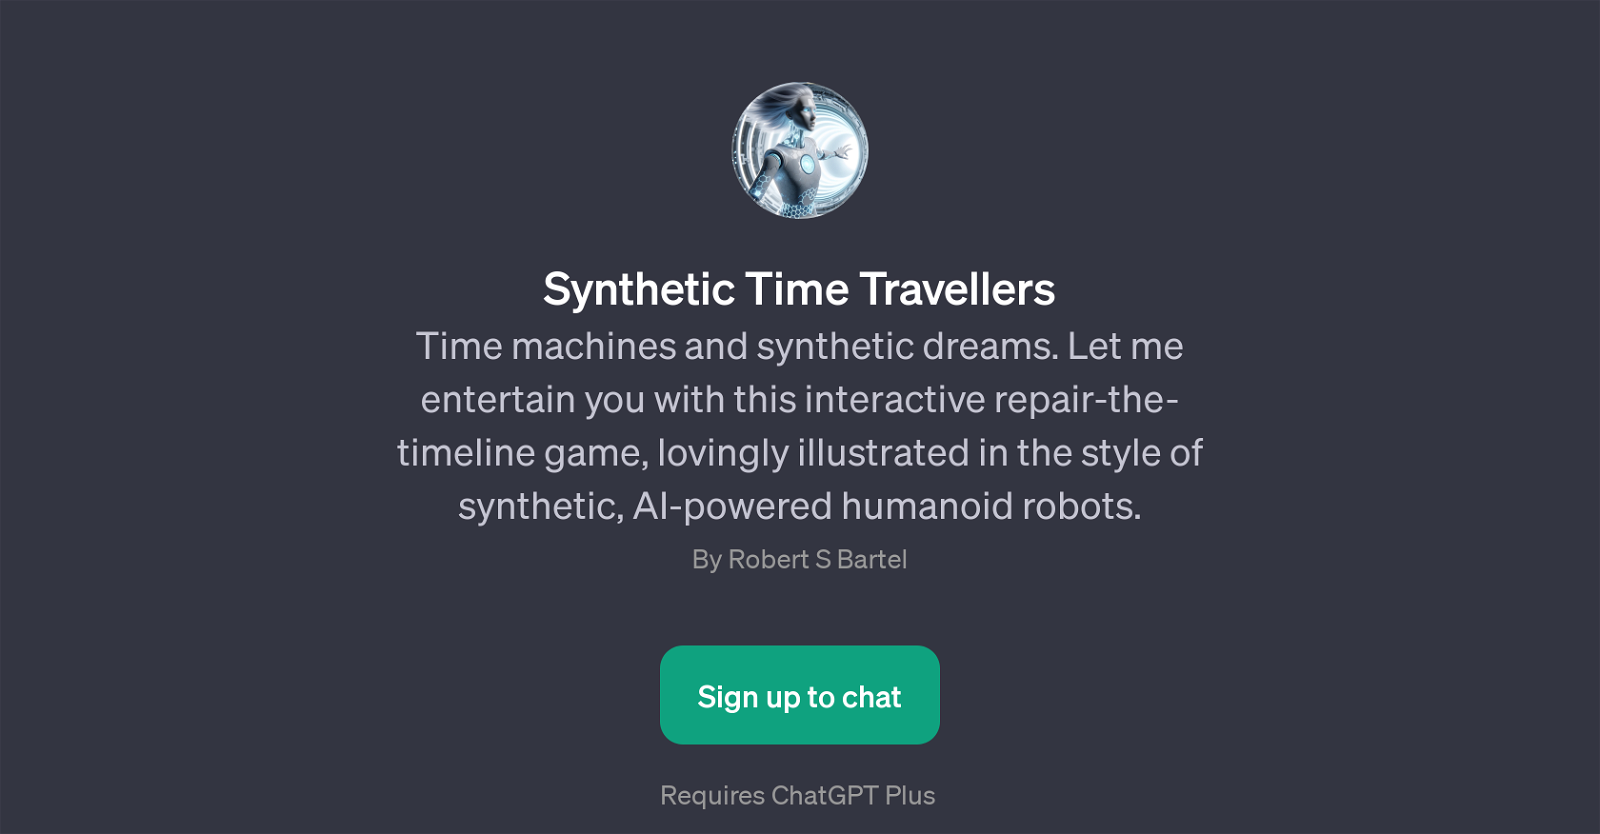 Synthetic Time Travellers website